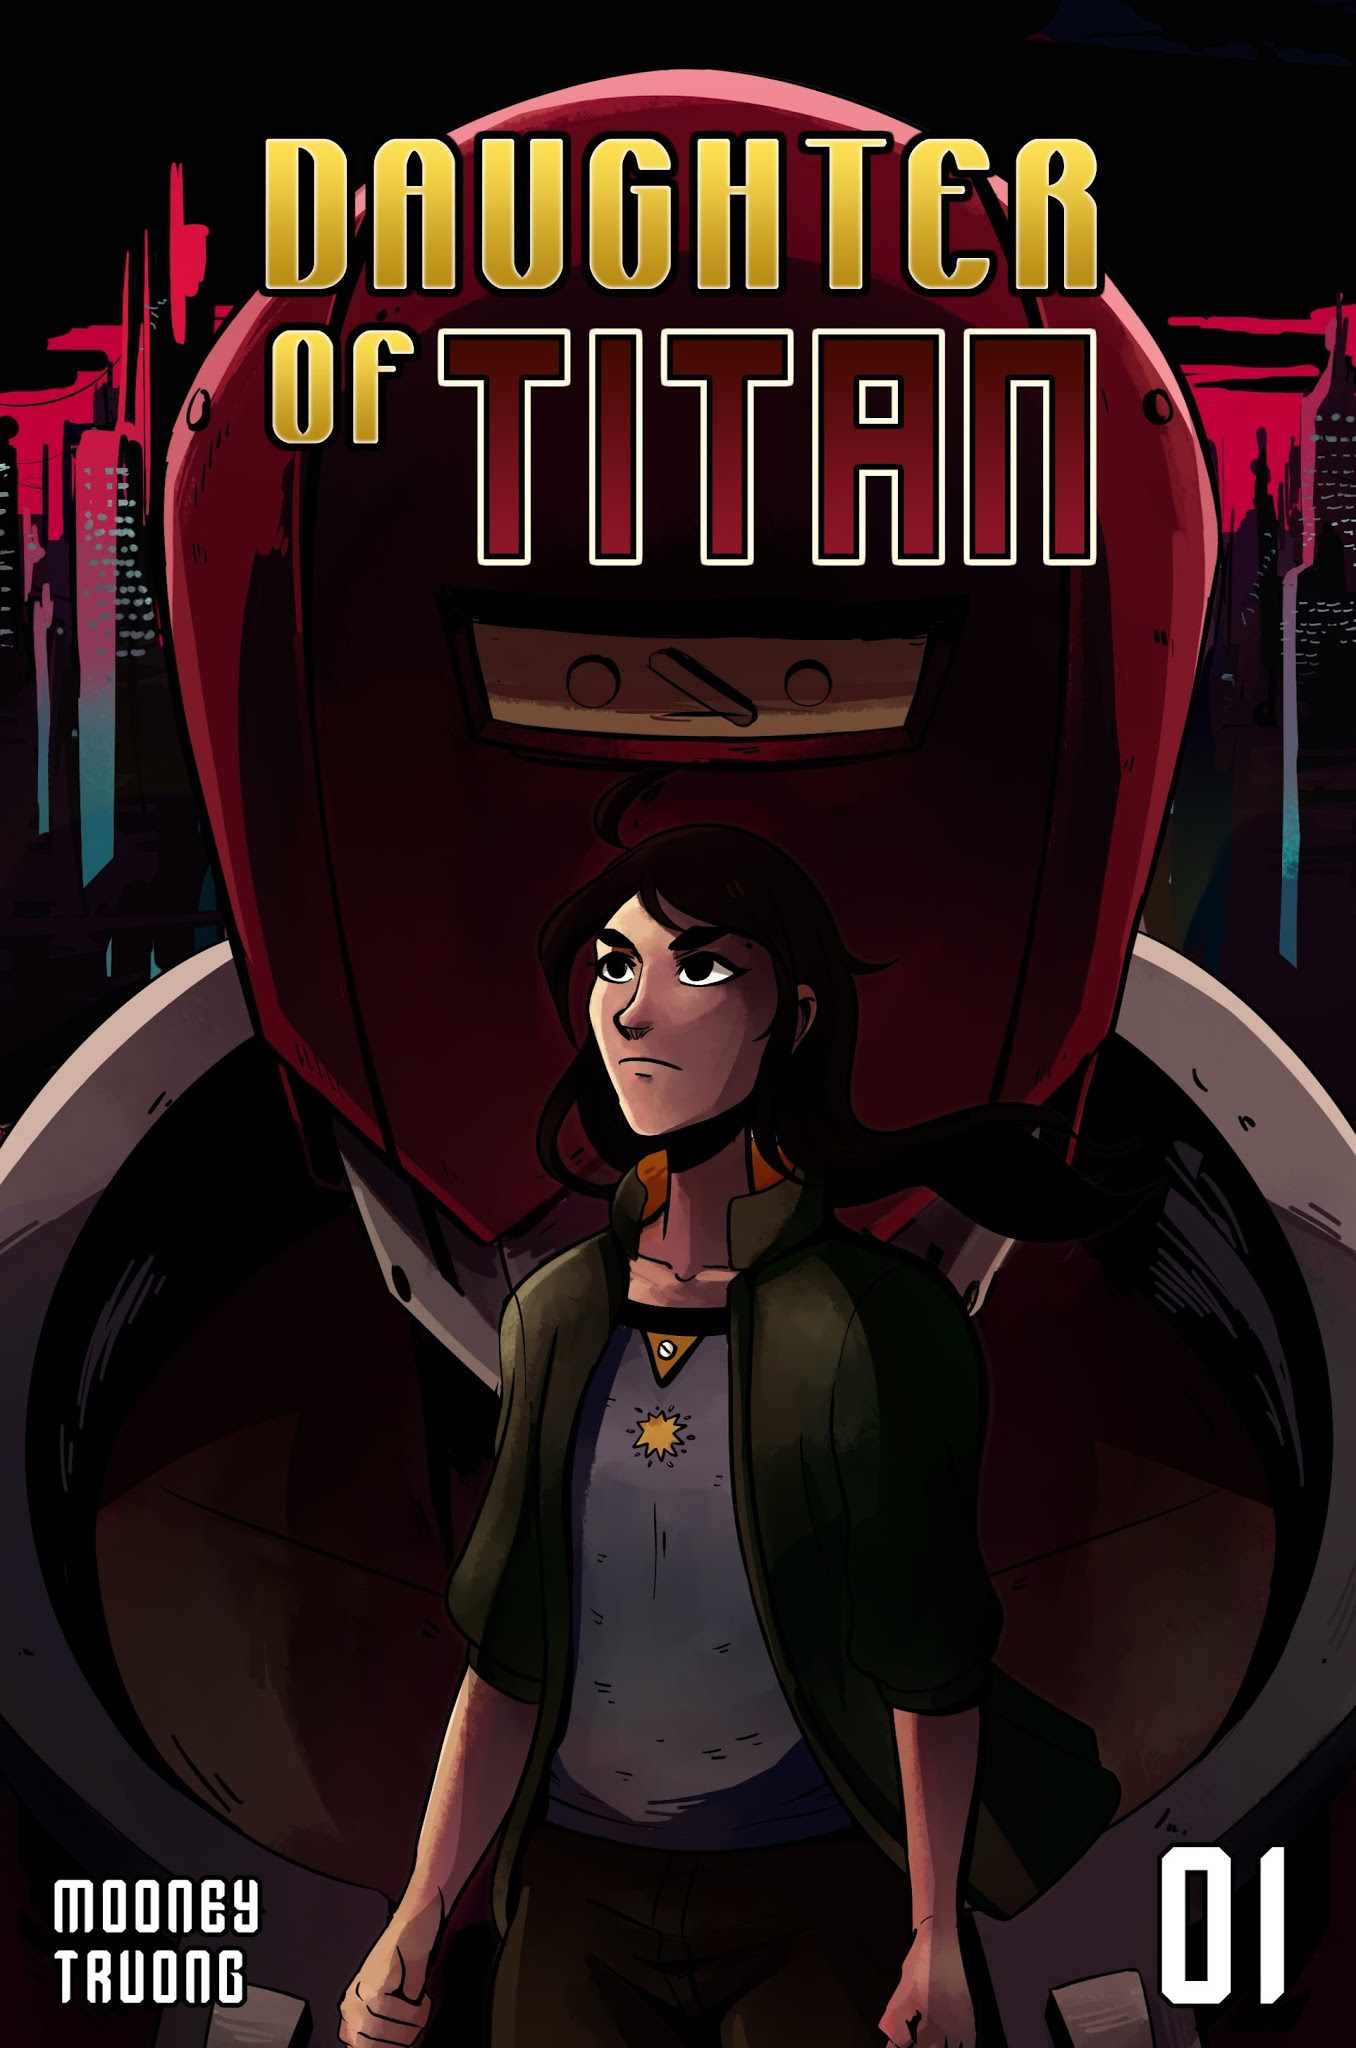 Read online Daughter of Titan comic -  Issue #1 - 1